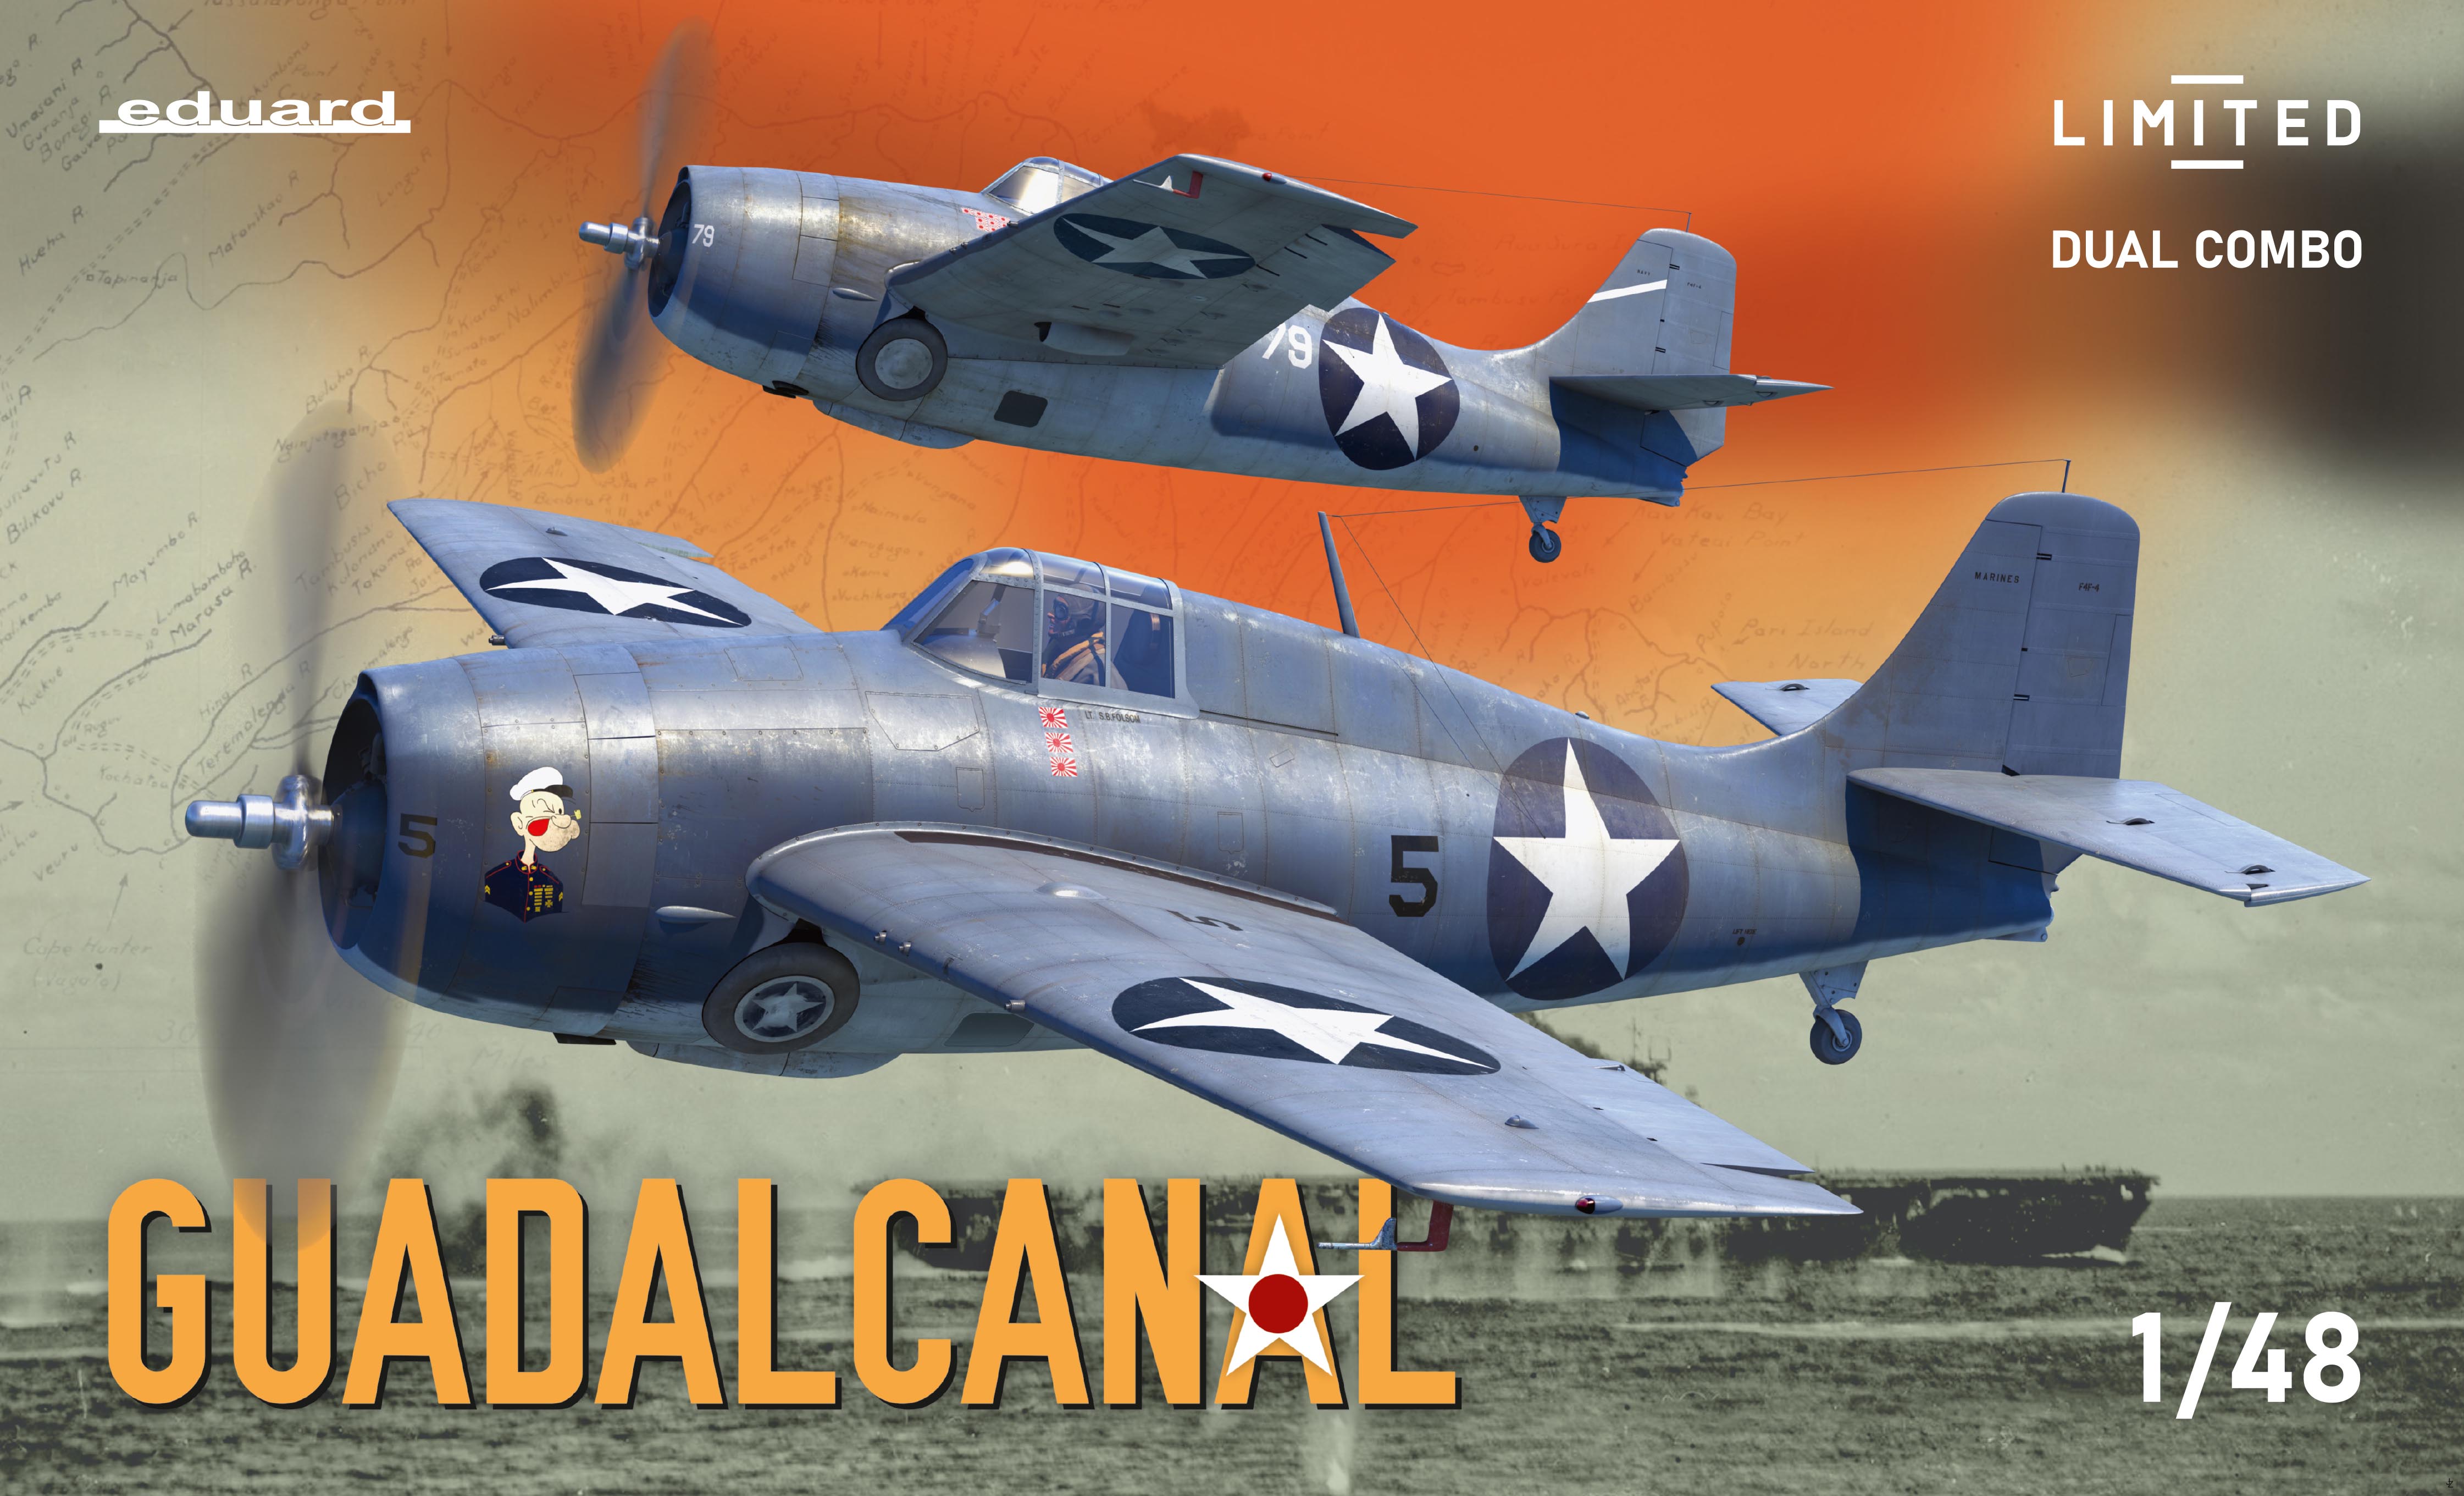 1/48 GUADALCANAL (F4F-4 Wildcat early & late) - (Limited edition - Dual Combo)